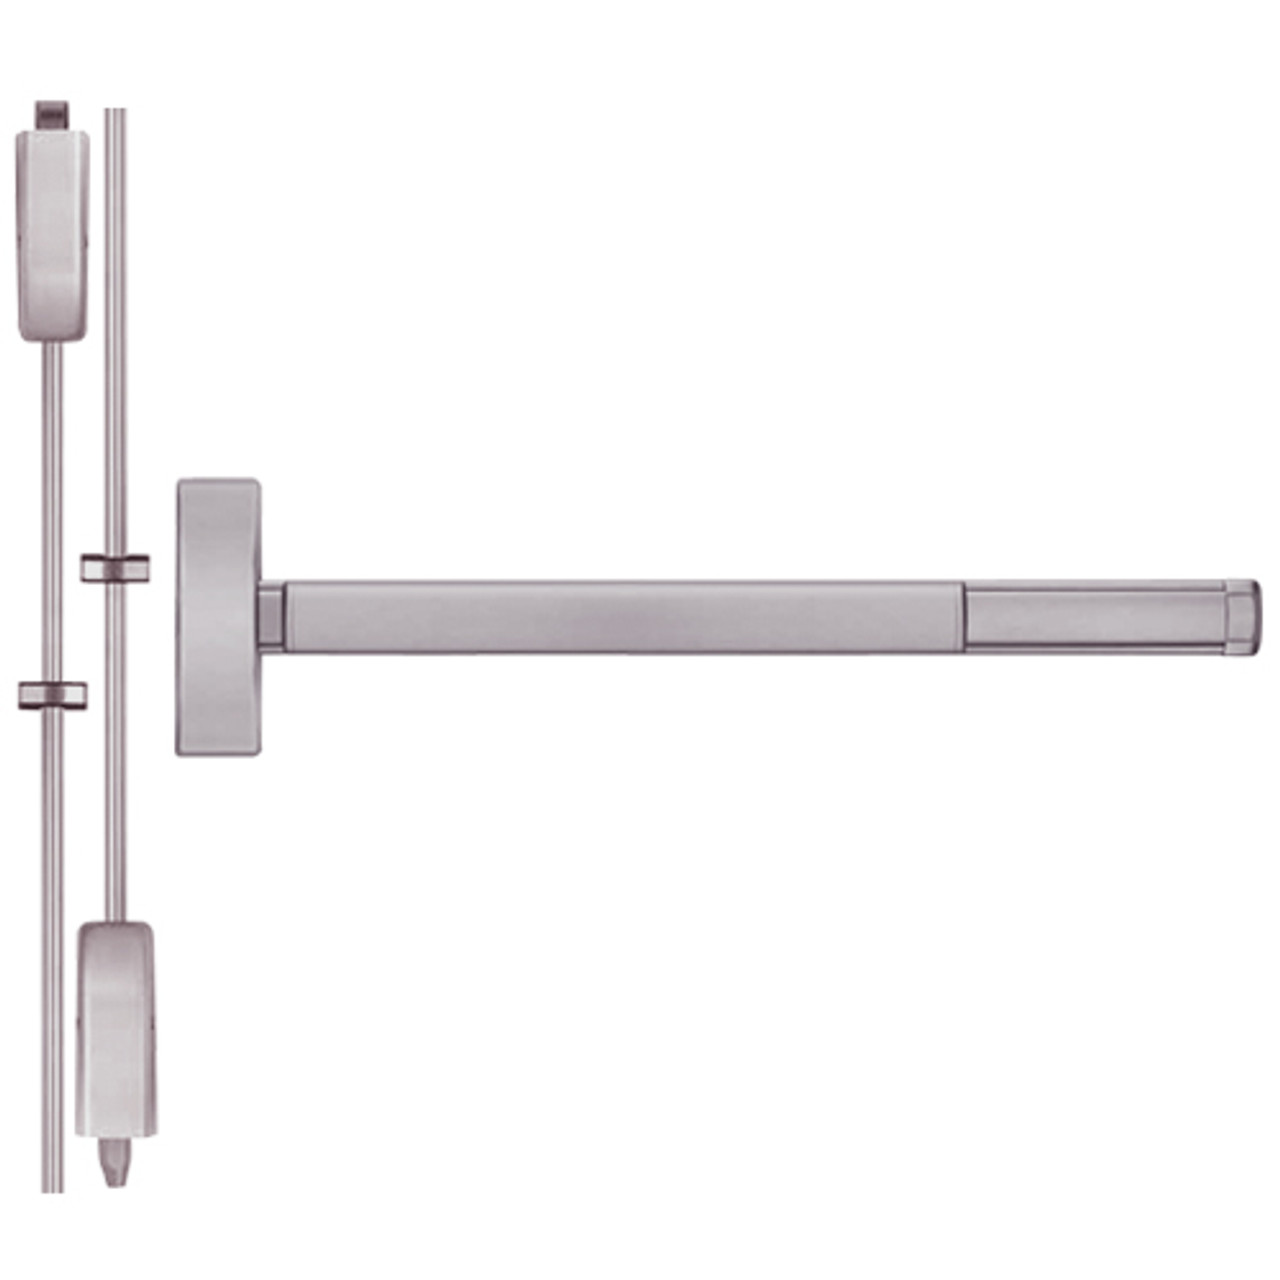 DEFL2202LBR-630-36 PHI 2200 Series Fire Rated Apex Surface Vertical Rod Device with Delayed Egress Prepped for Dummy Trim in Satin Stainless Steel Finish